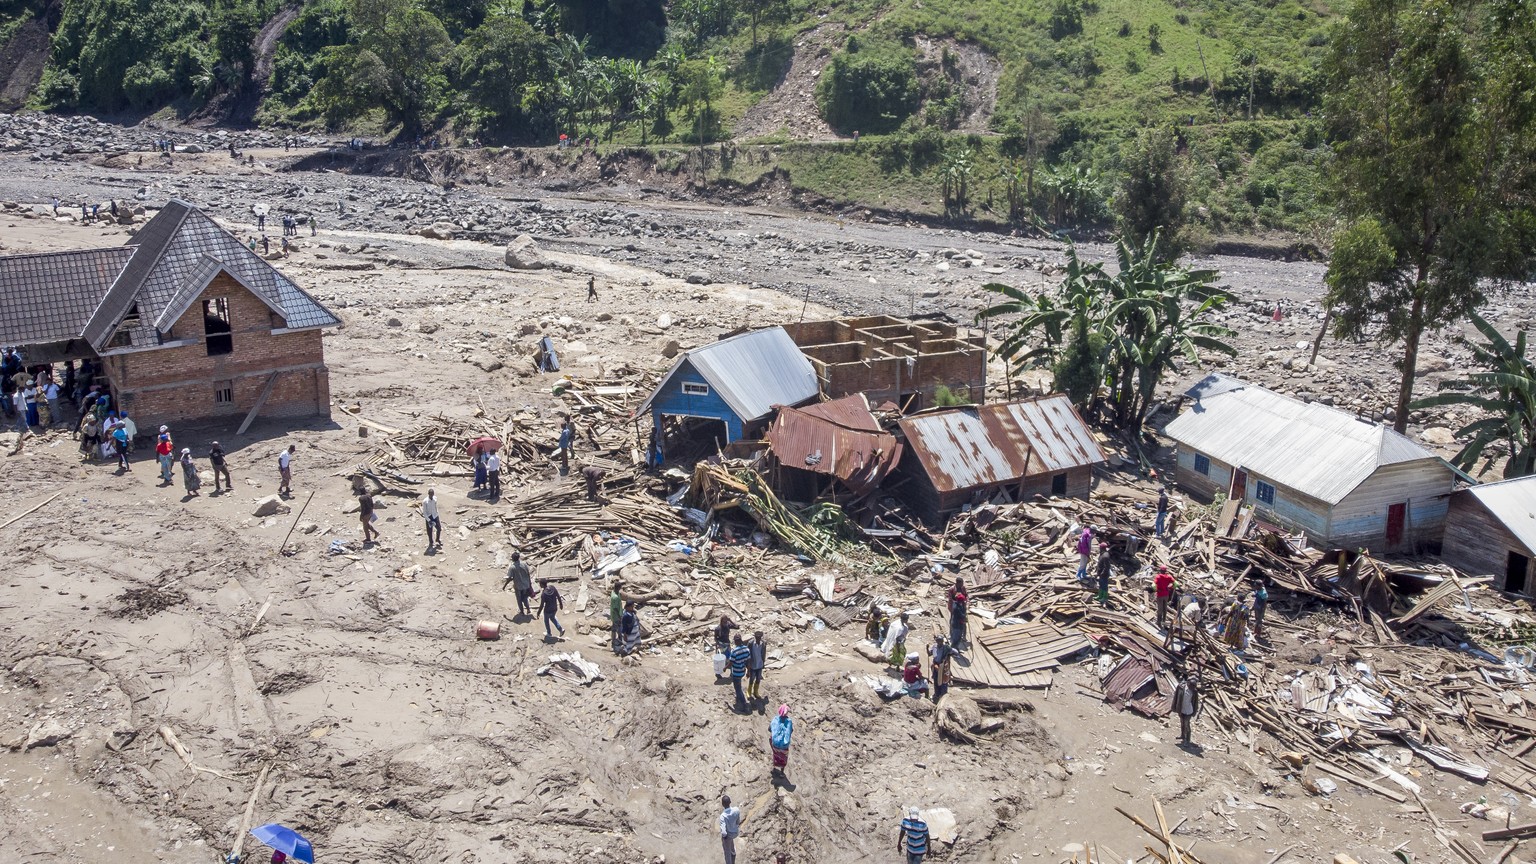 Survivors walk amidst debris next to destroyed buildings in the aftermath of floods in the village of Nyamukubi, South Kivu province, in Congo Monday, May 8, 2023. The death toll from floods in easter ...